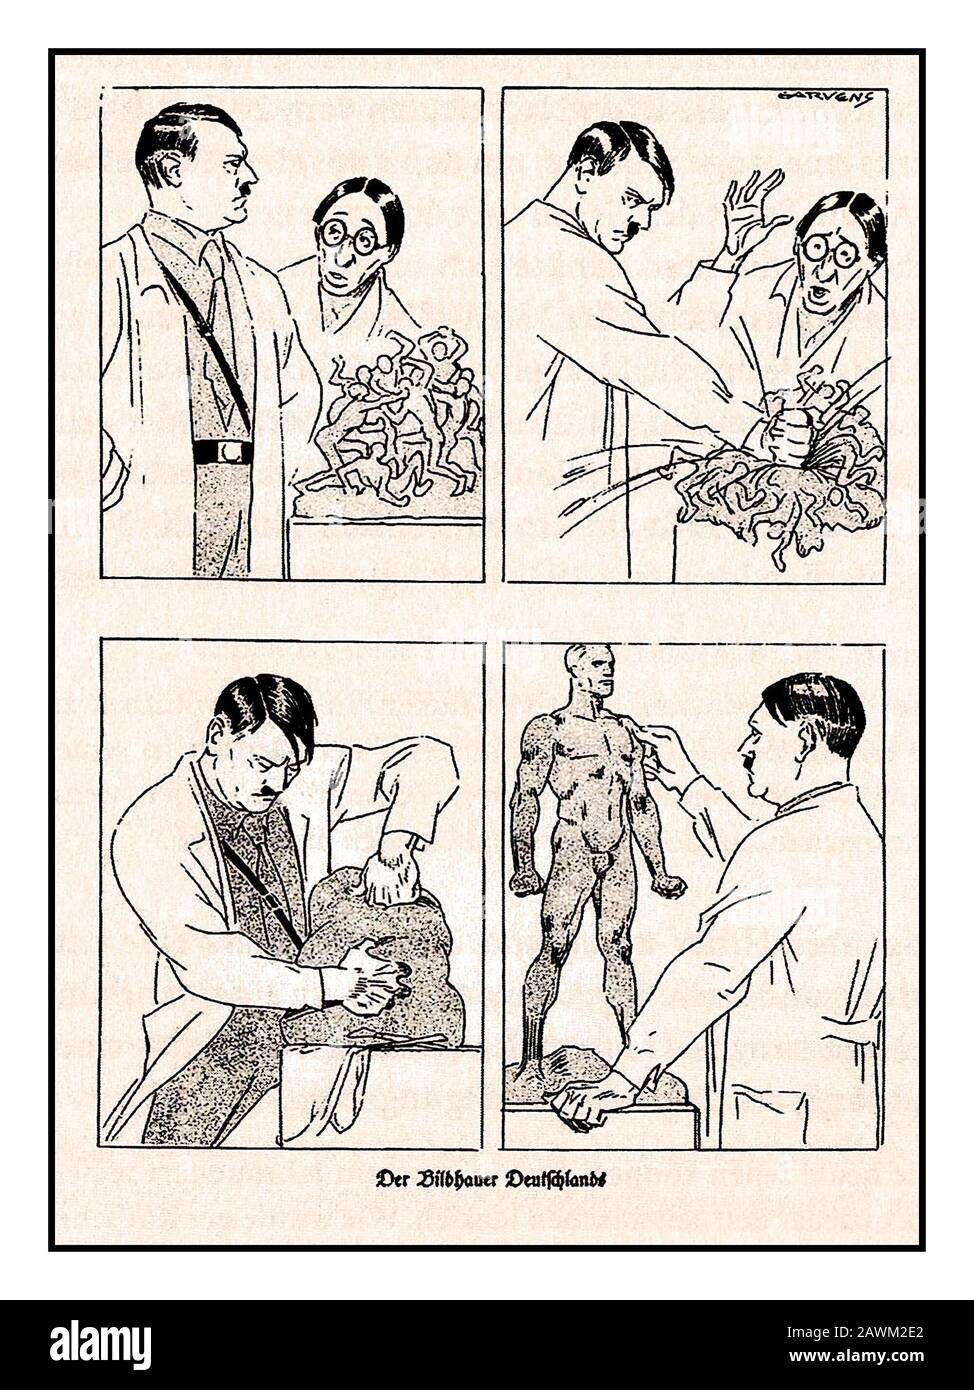 A German Nazi cartoon of 1933. Adolf Hitler is titled as a 'Sculptor for Germany' creating the perfect Aryan male  A bespectacled stereotype Jewish artist is shocked by his sculpture being violently transformed from a group of people in conflict, to a sculpture transformation produced by Adolf Hitler of a master race Aryan male Stock Photo